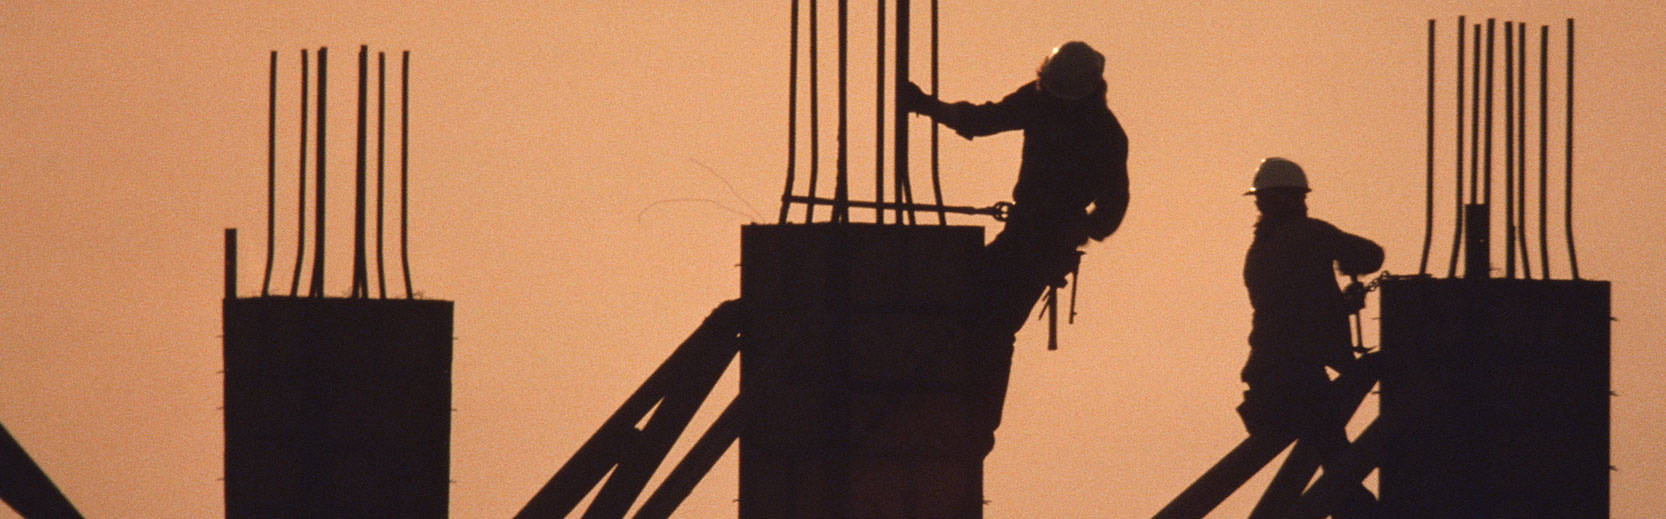 image of construction workers at dusk on a tall construction with rebar showing